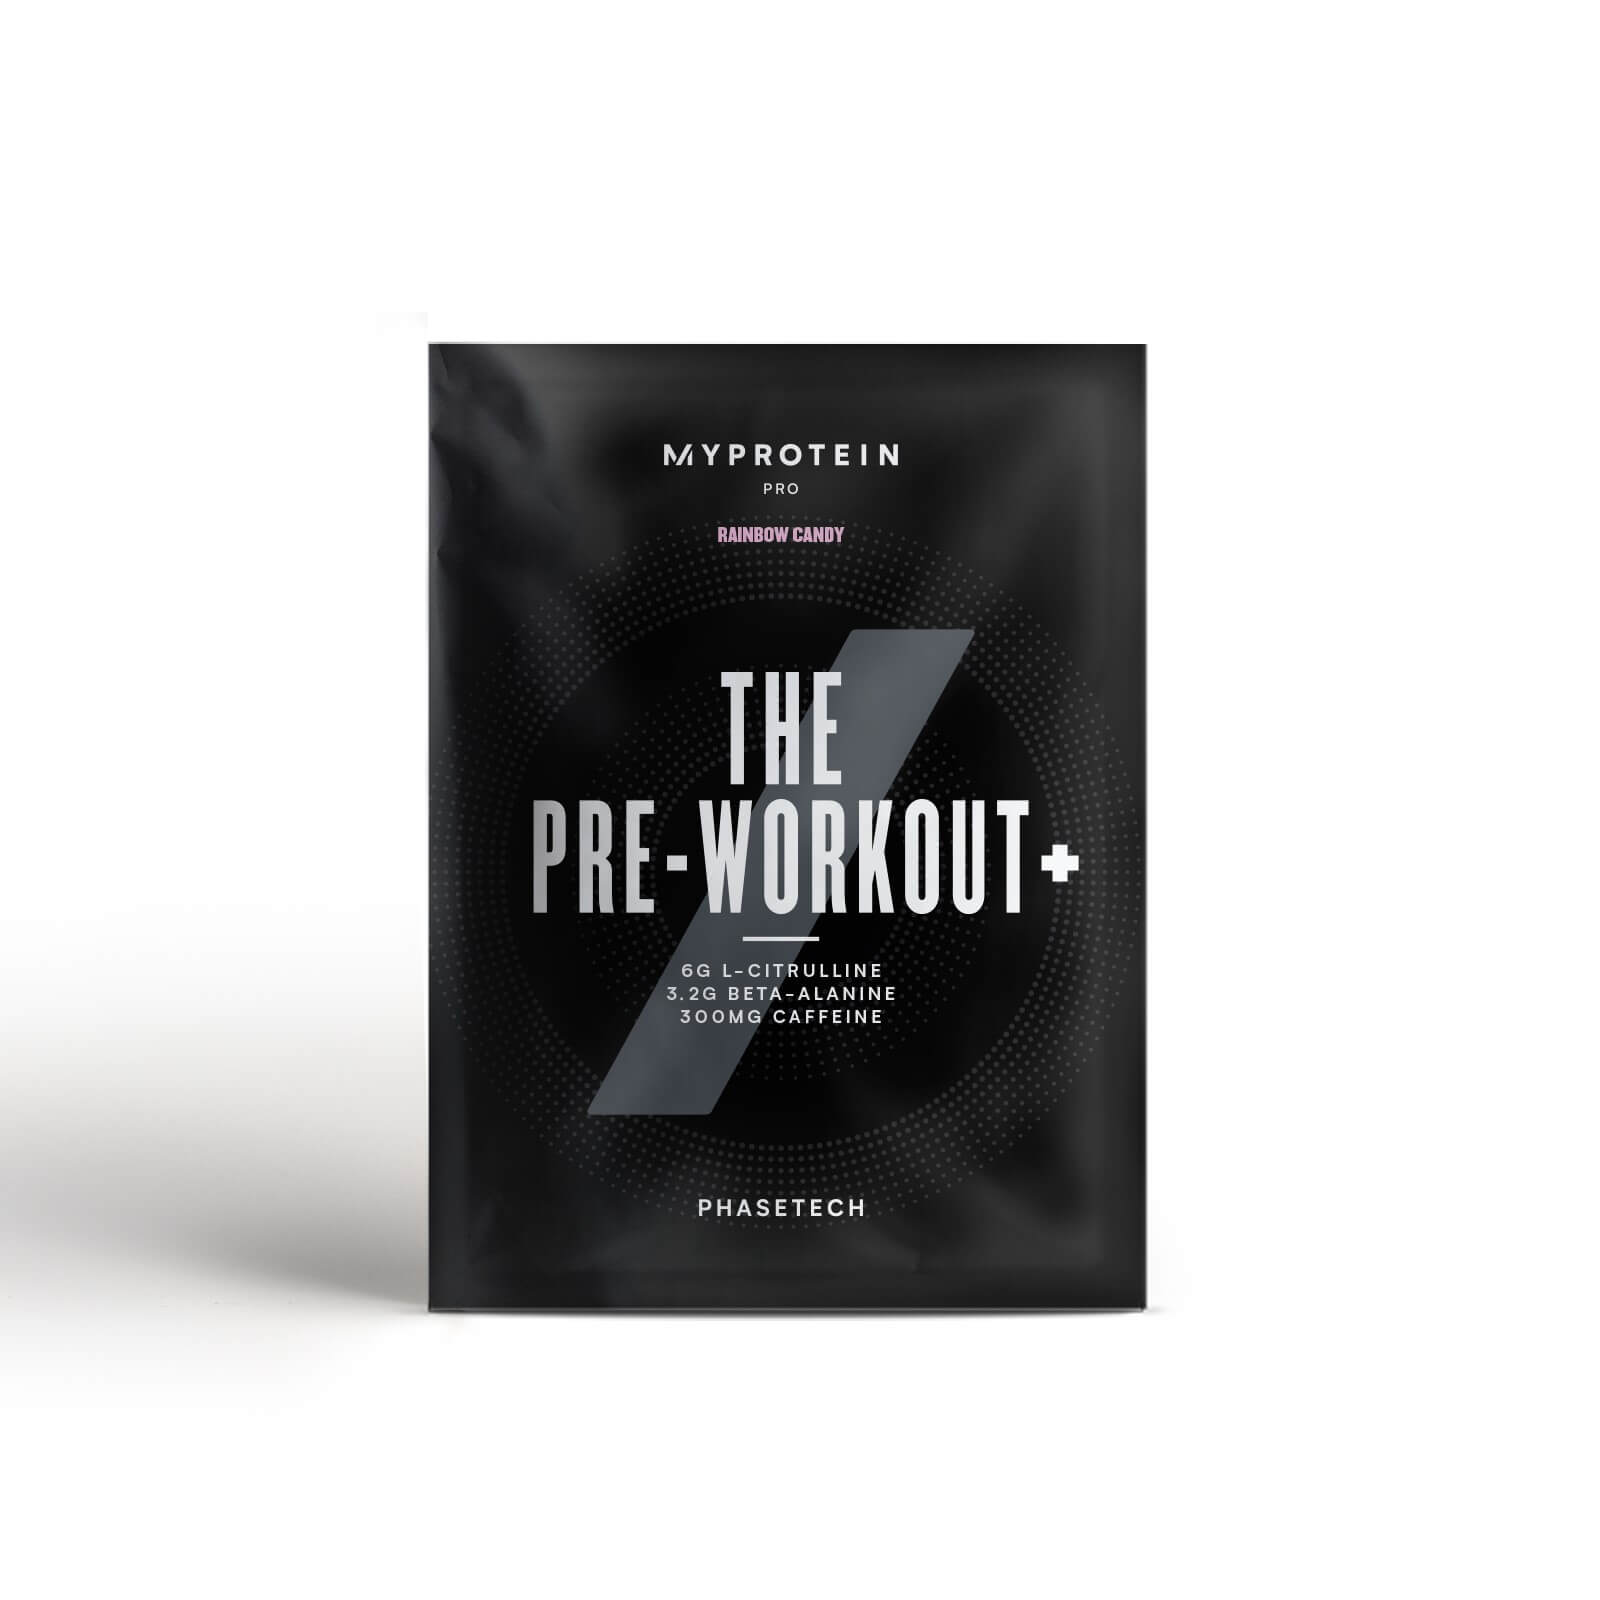 THE Pre-Workout+ (Sample) - Rainbow Candy